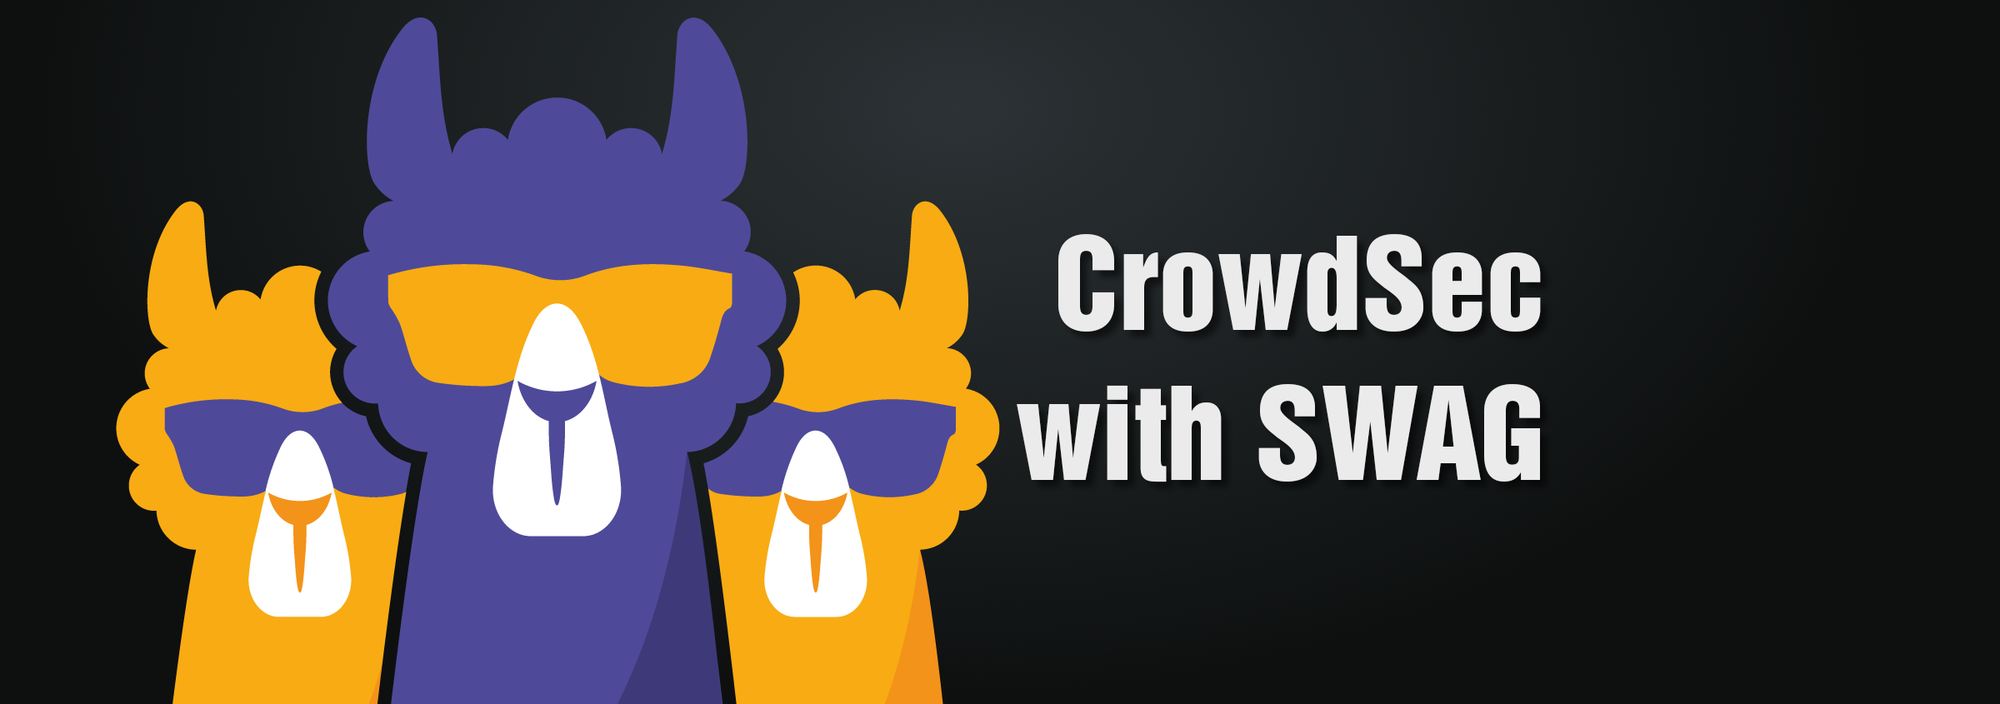 Block malicious connections with CrowdSec as Intrusion Prevention System on top of SWAG